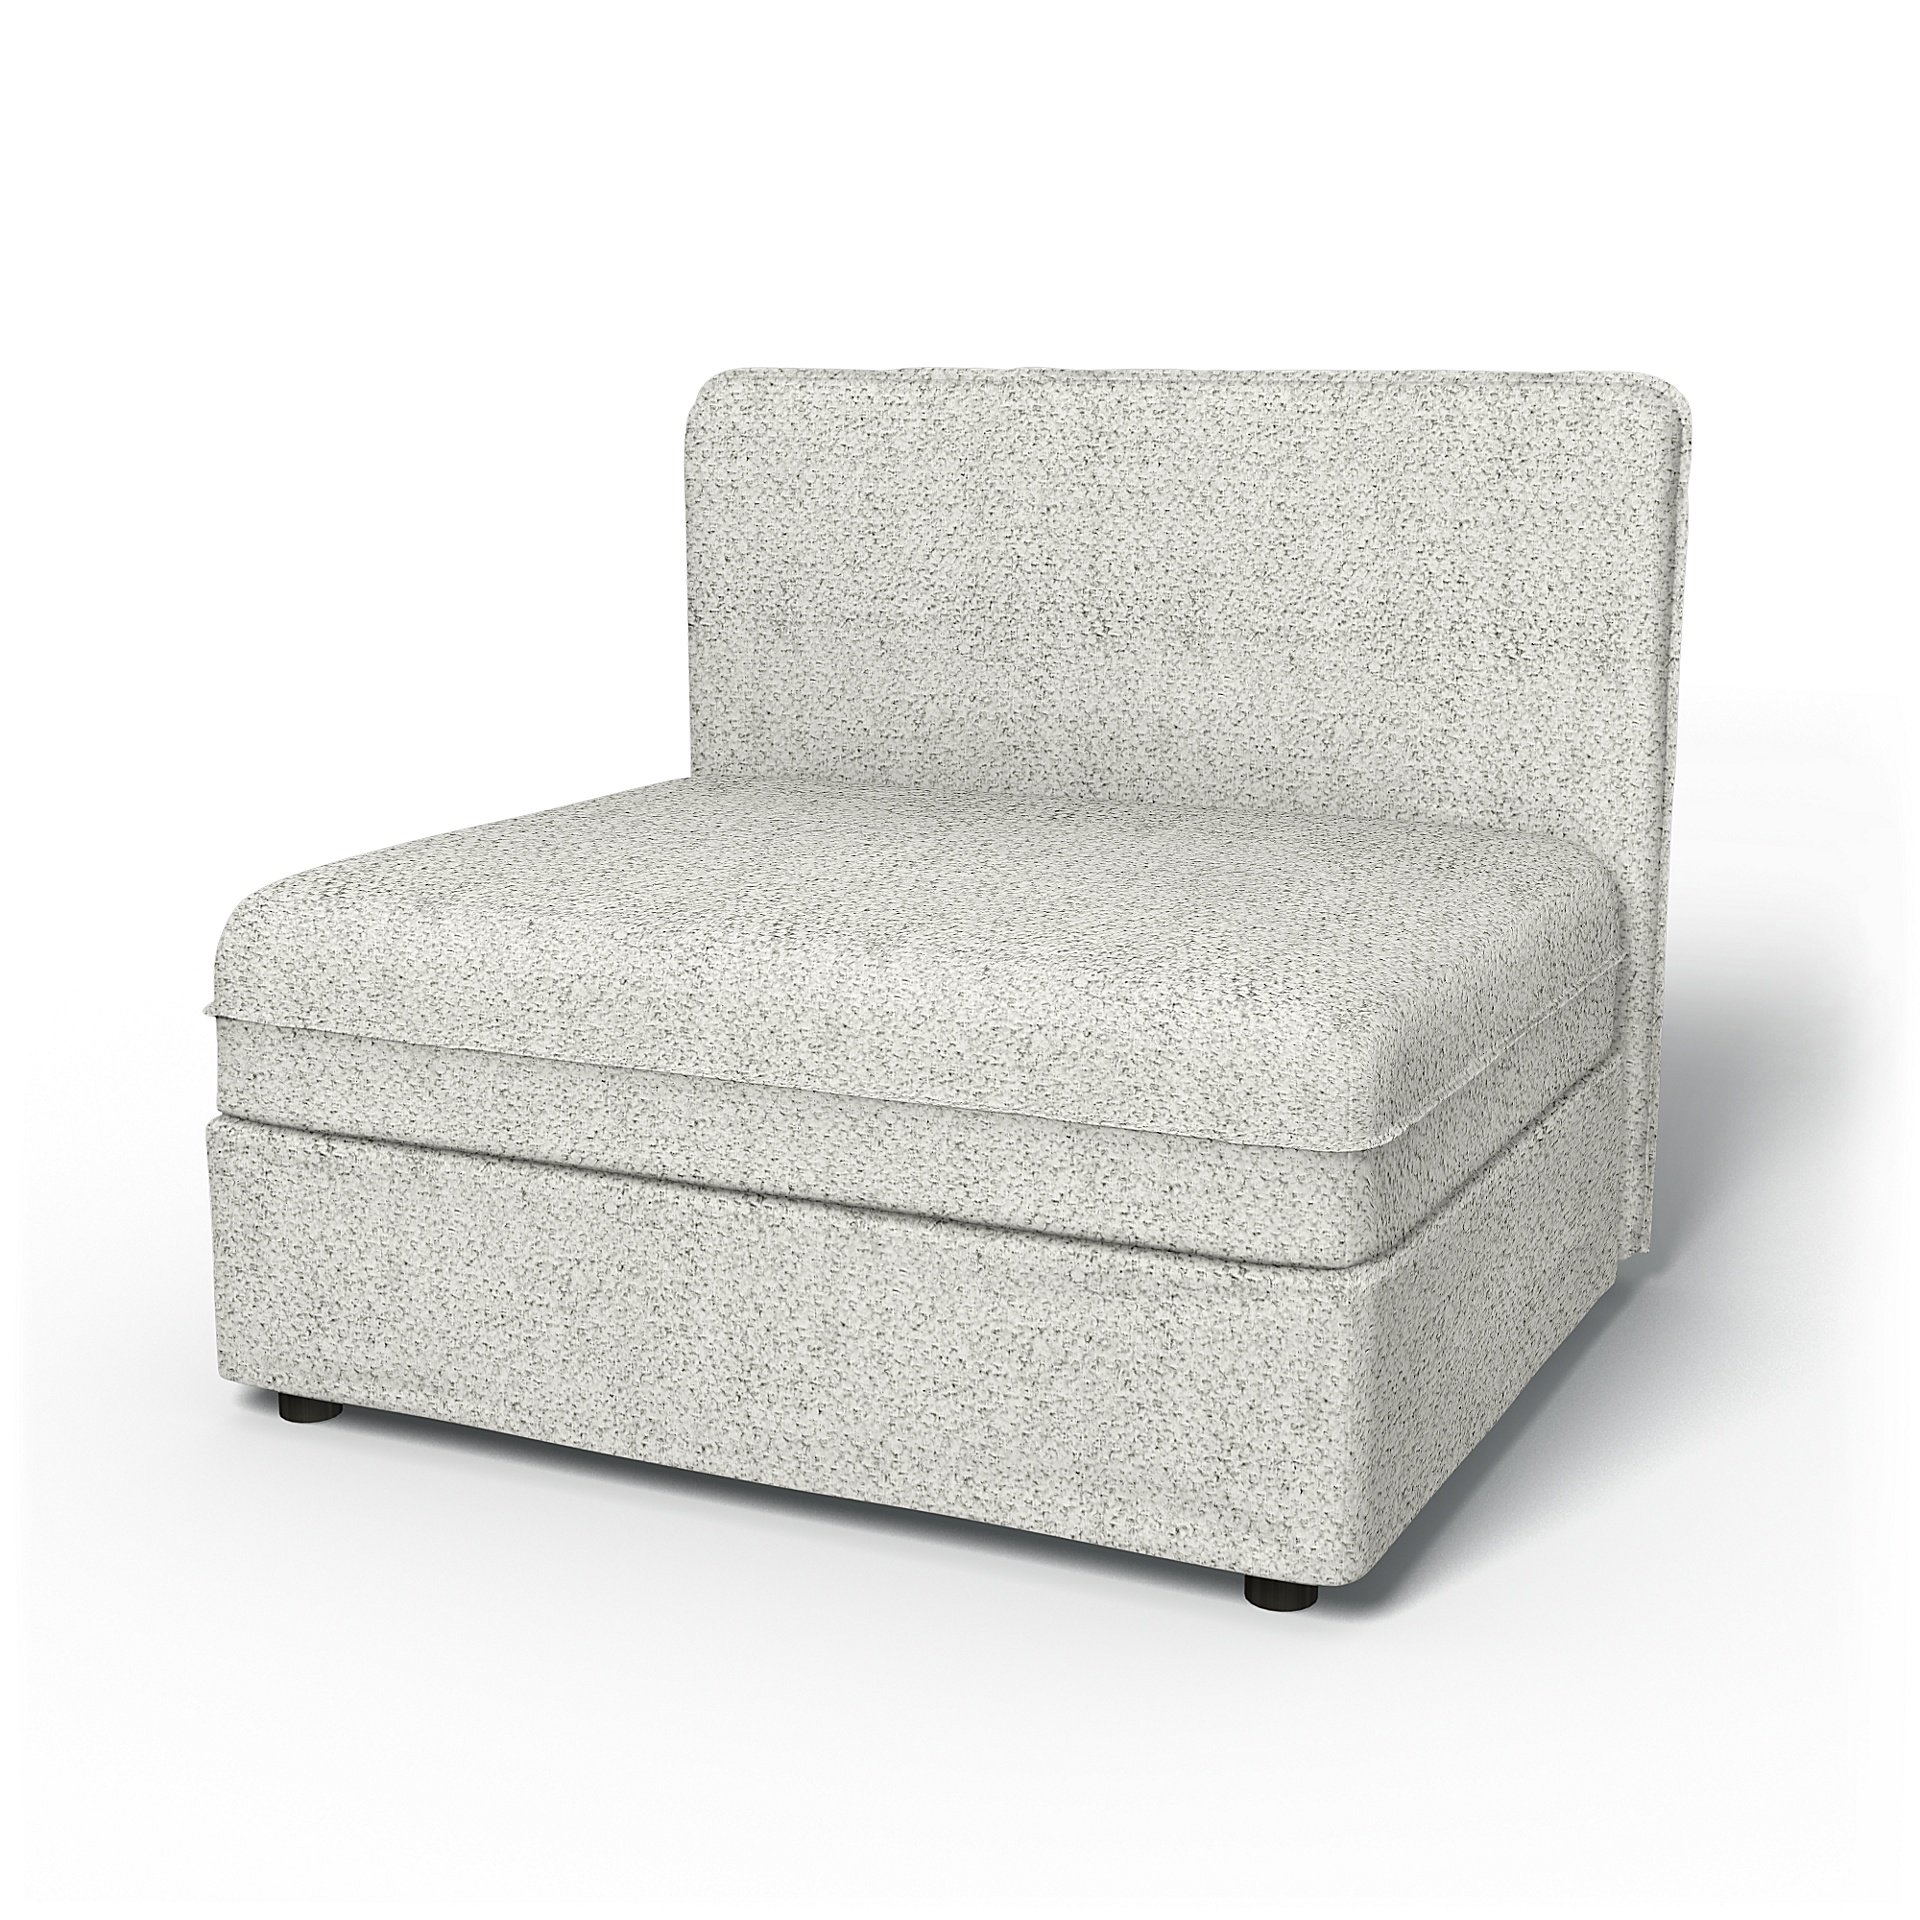 IKEA - Vallentuna Seat Module with Low Back Cover 100x80cm 39x32in, Ivory, Boucle & Texture - Bemz